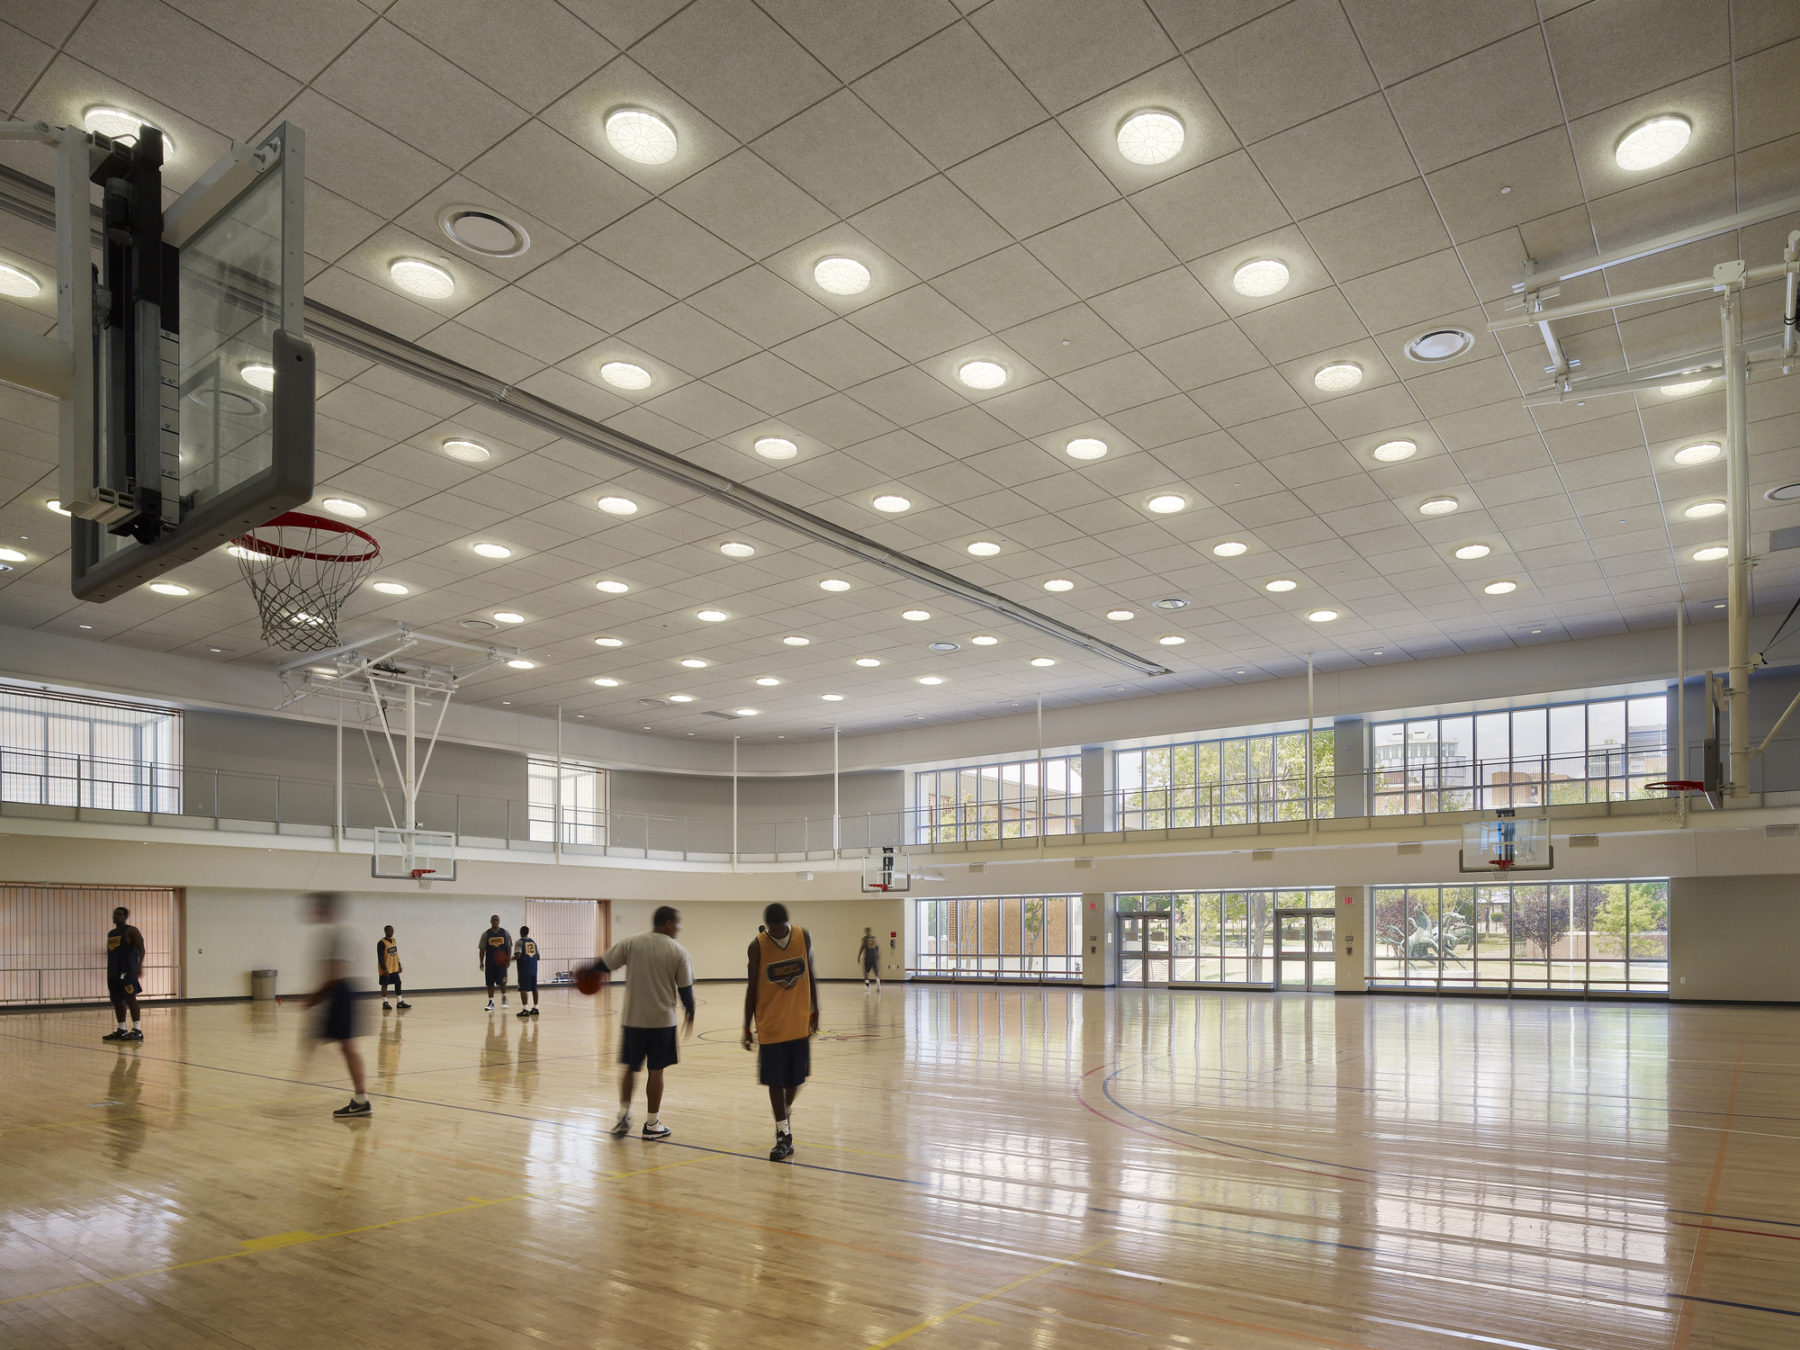 people playing on an indoor basketball court